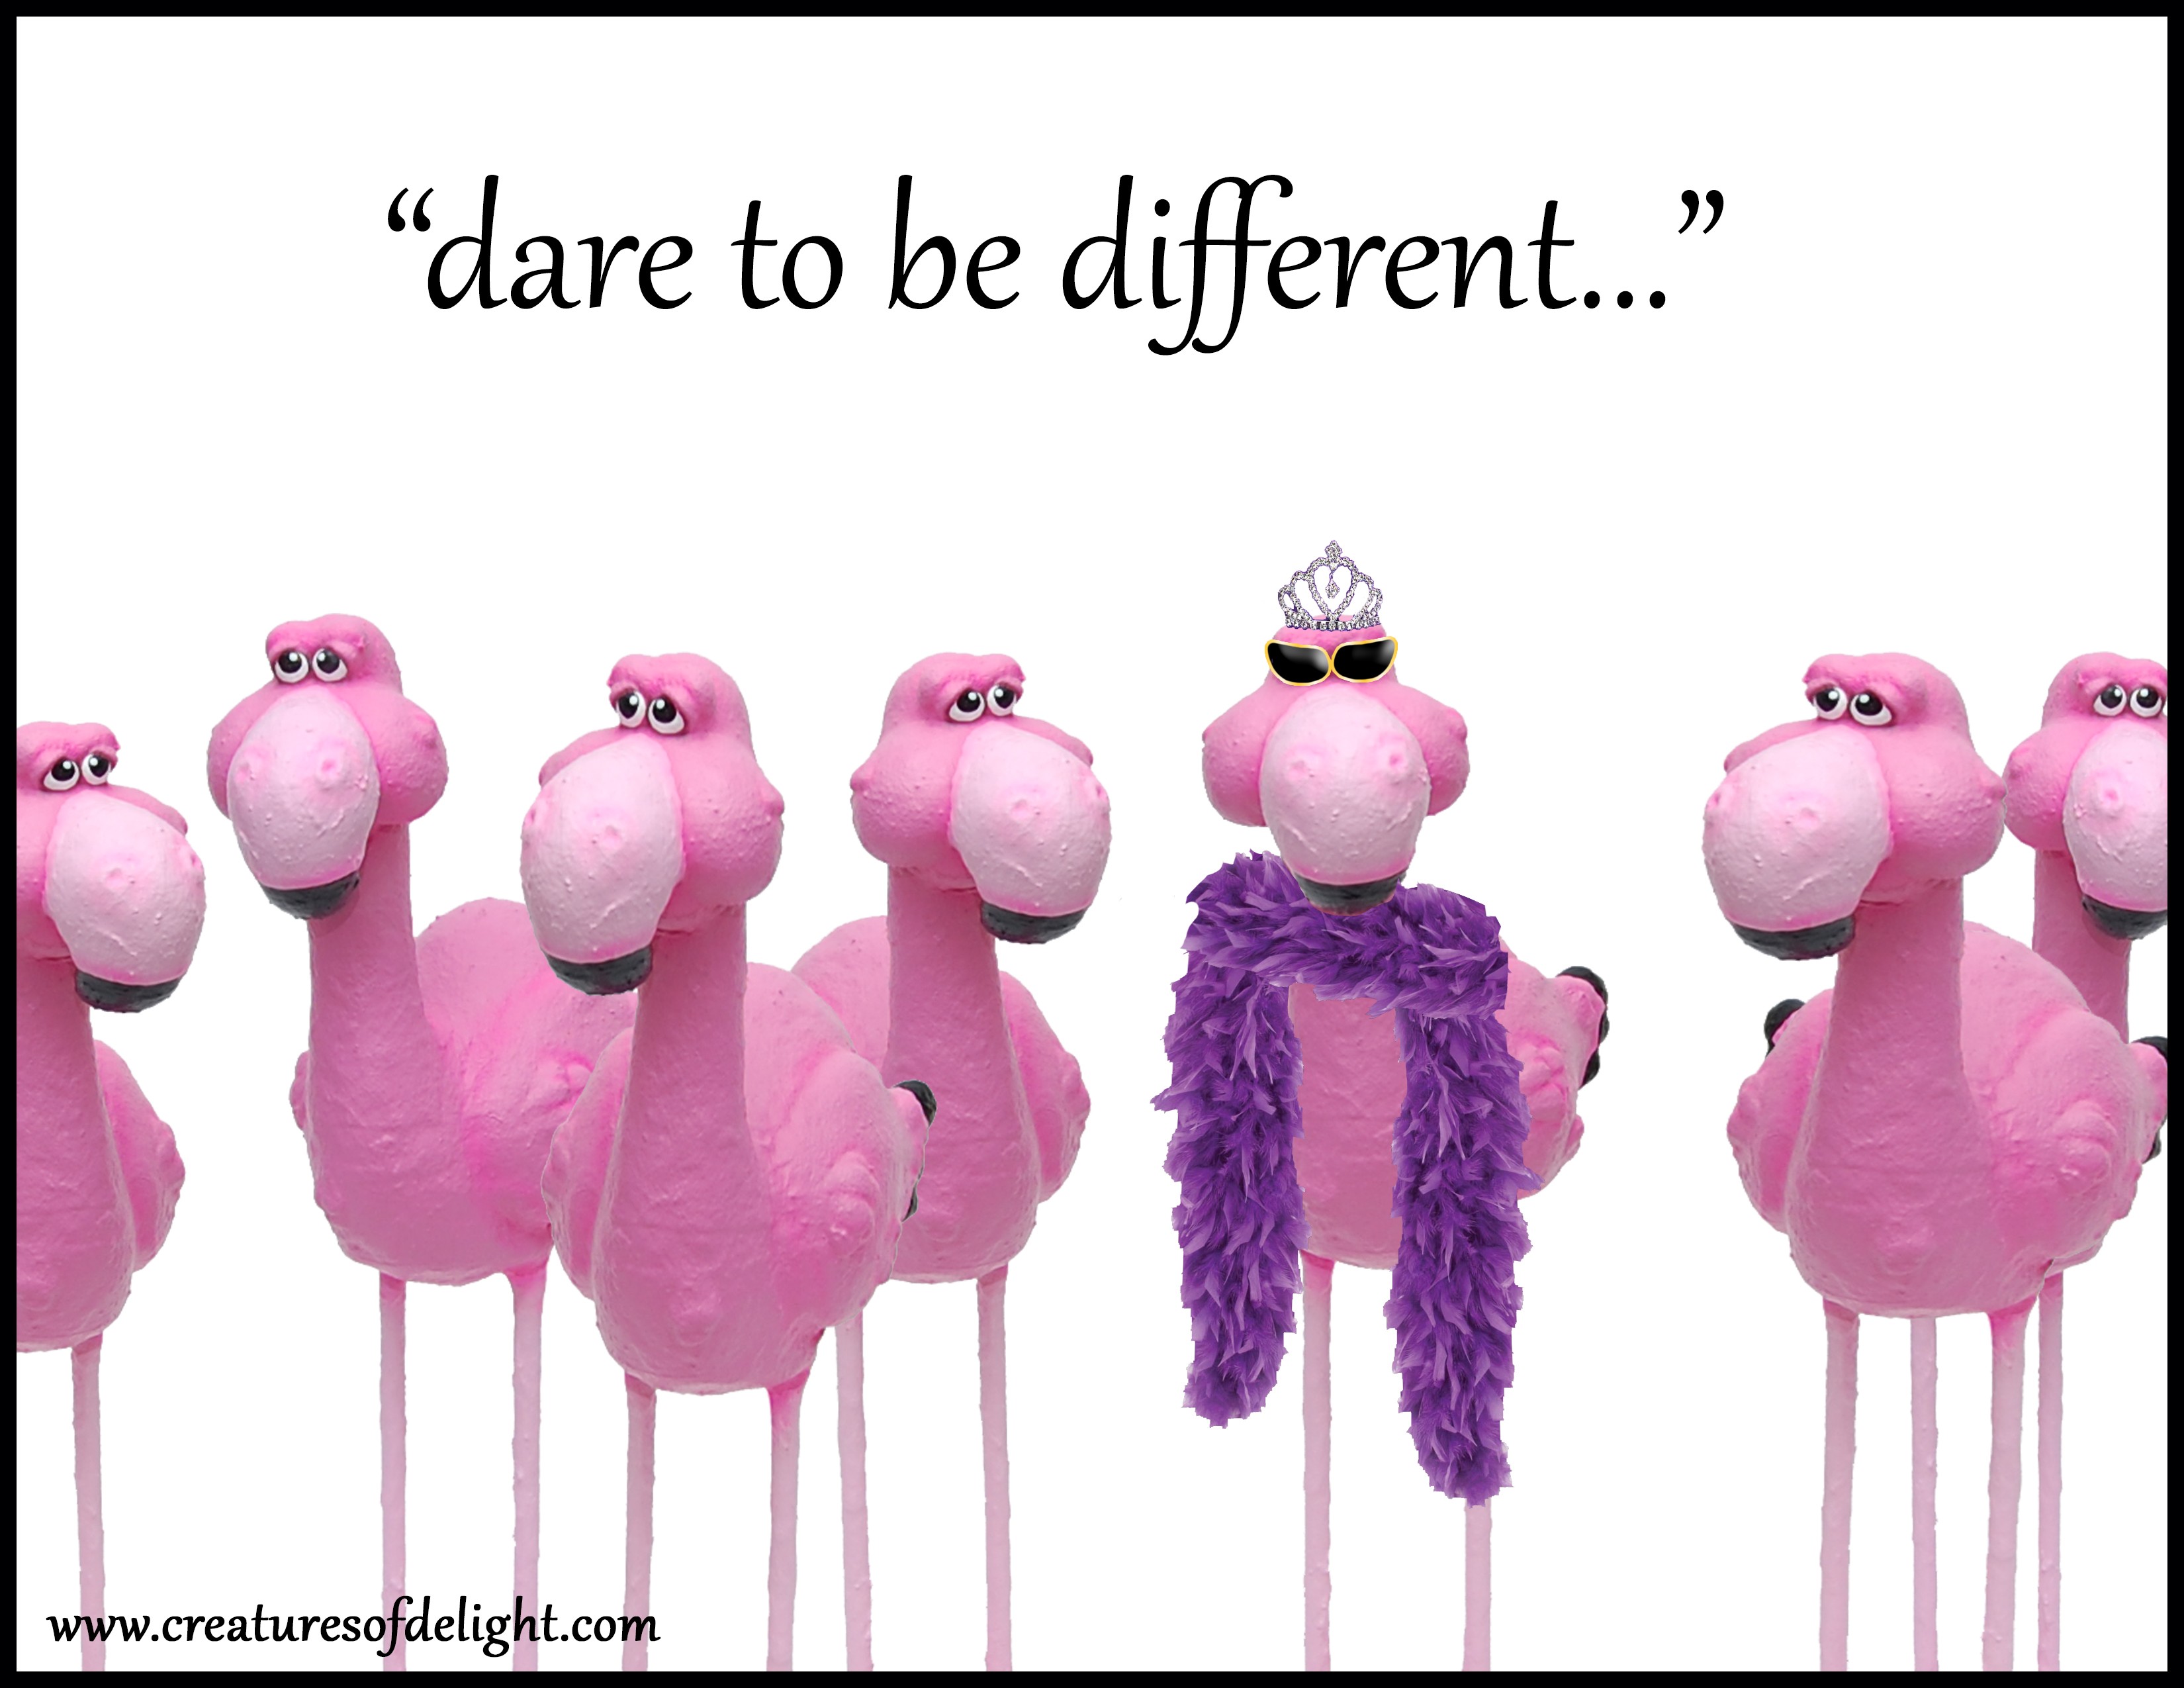 Allow to be different. Be different. Dare to be different. "Dare to be different" д.